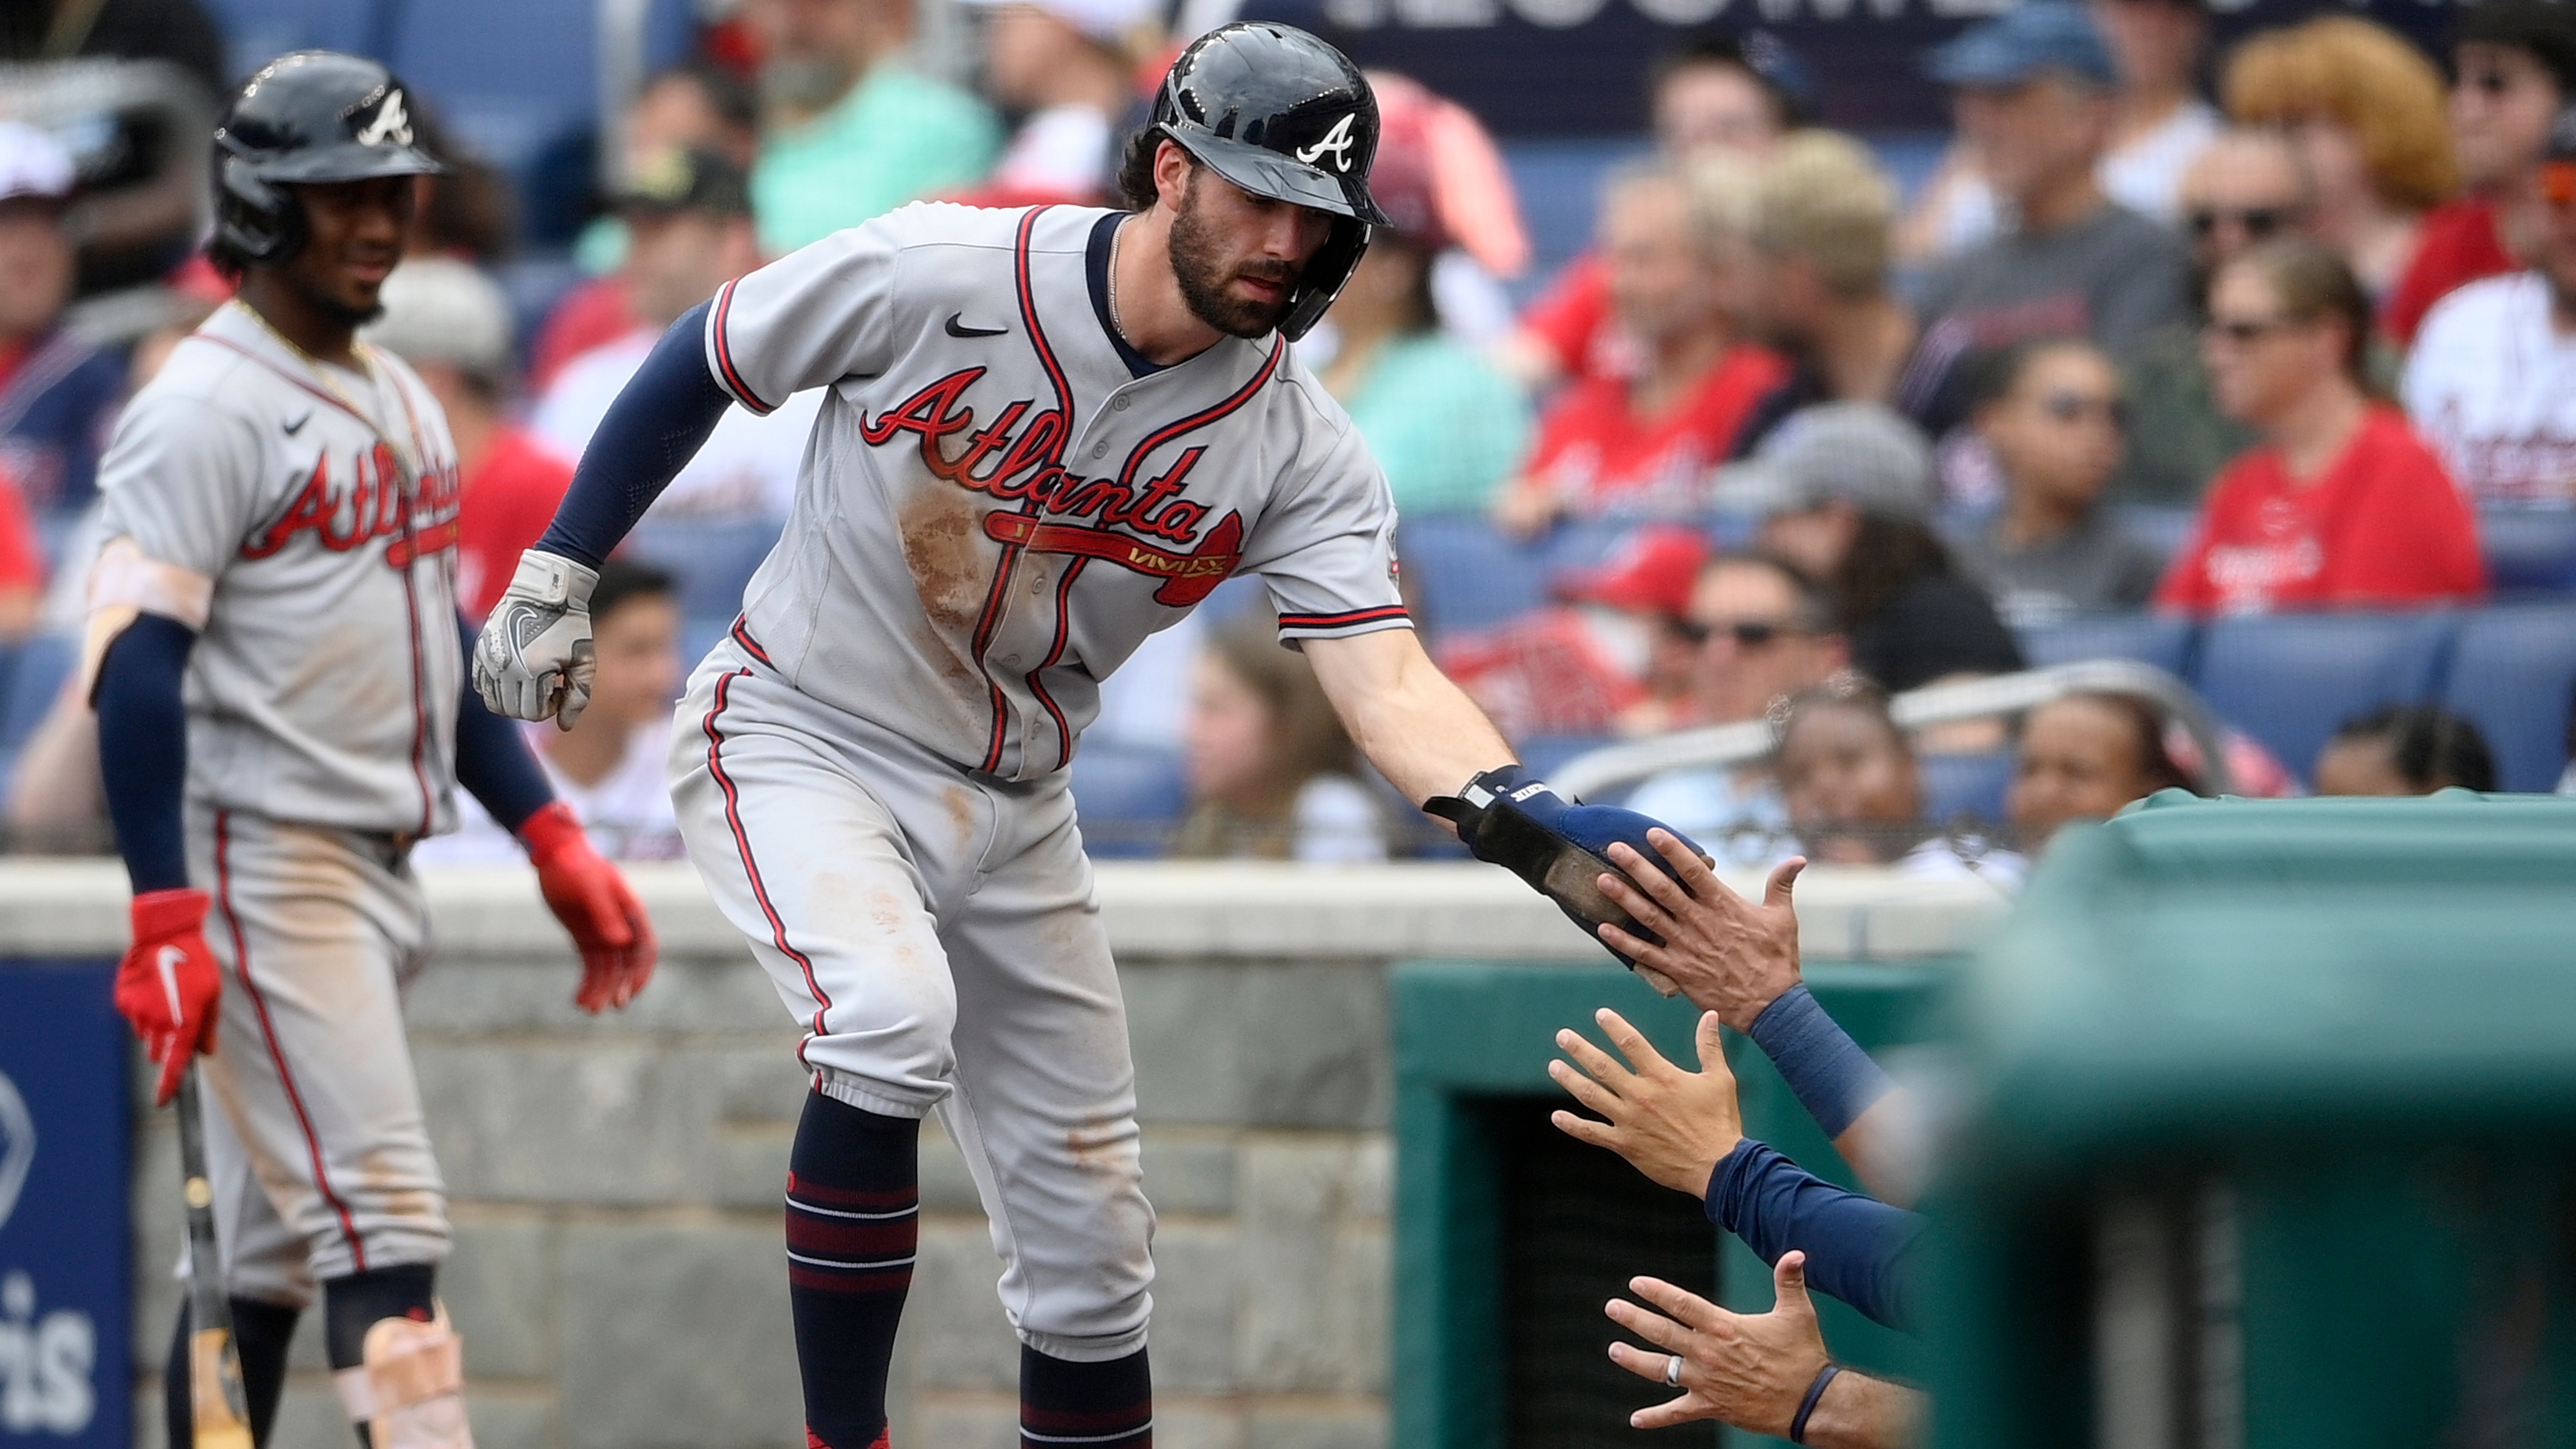 Dansby Swanson Has Atlanta Braves Surging in NL East - The New York Times